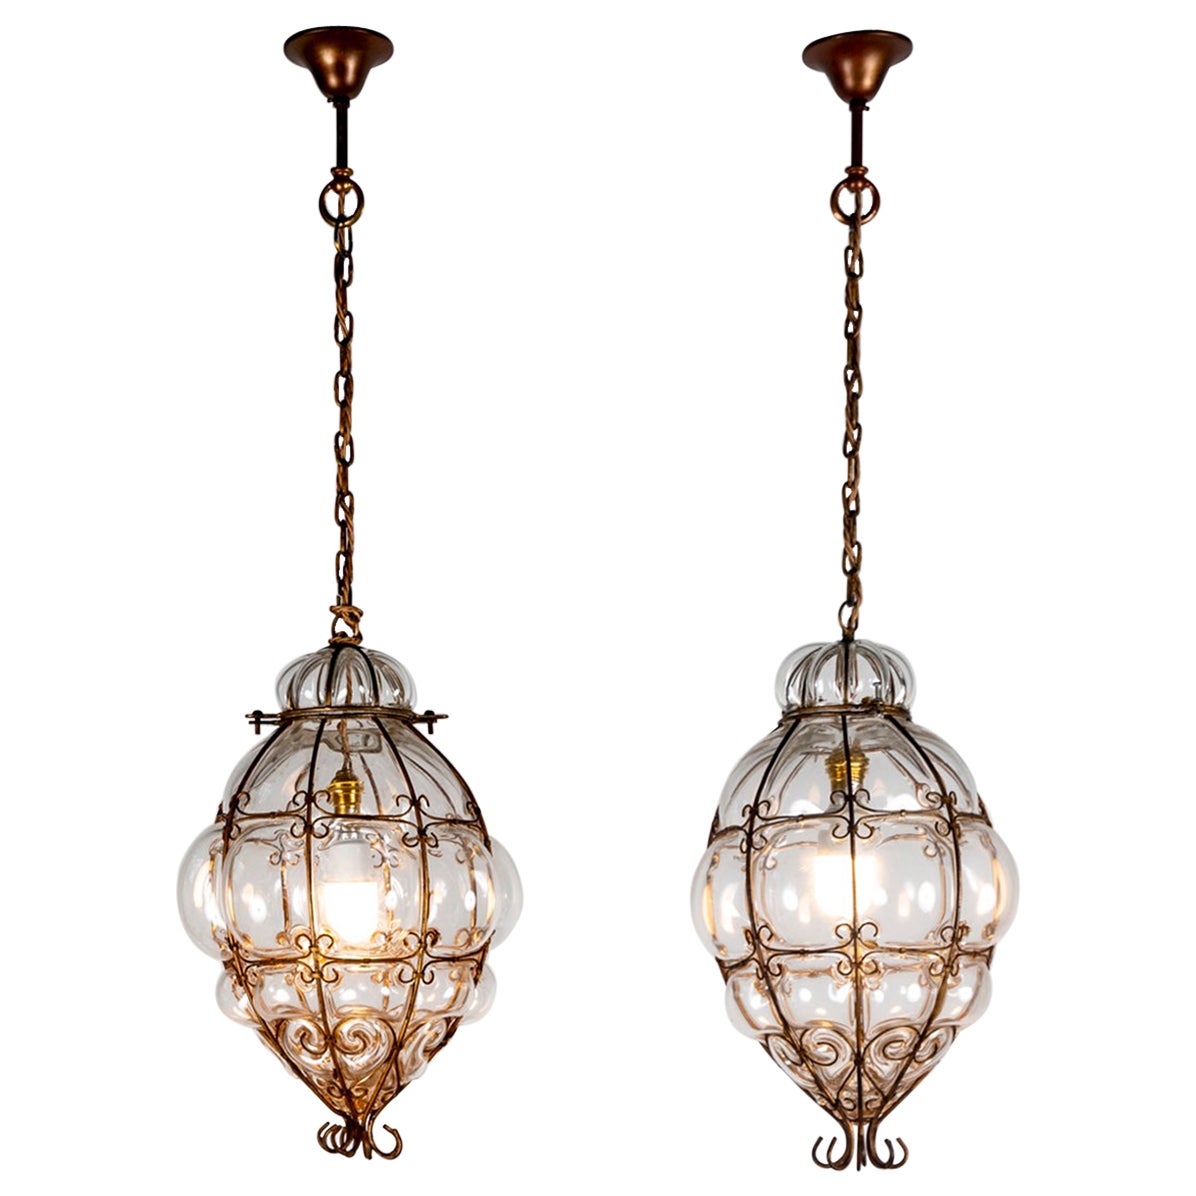 Pair of Archimede Seguso Murano Caged Glass Pendant Lights For Sale